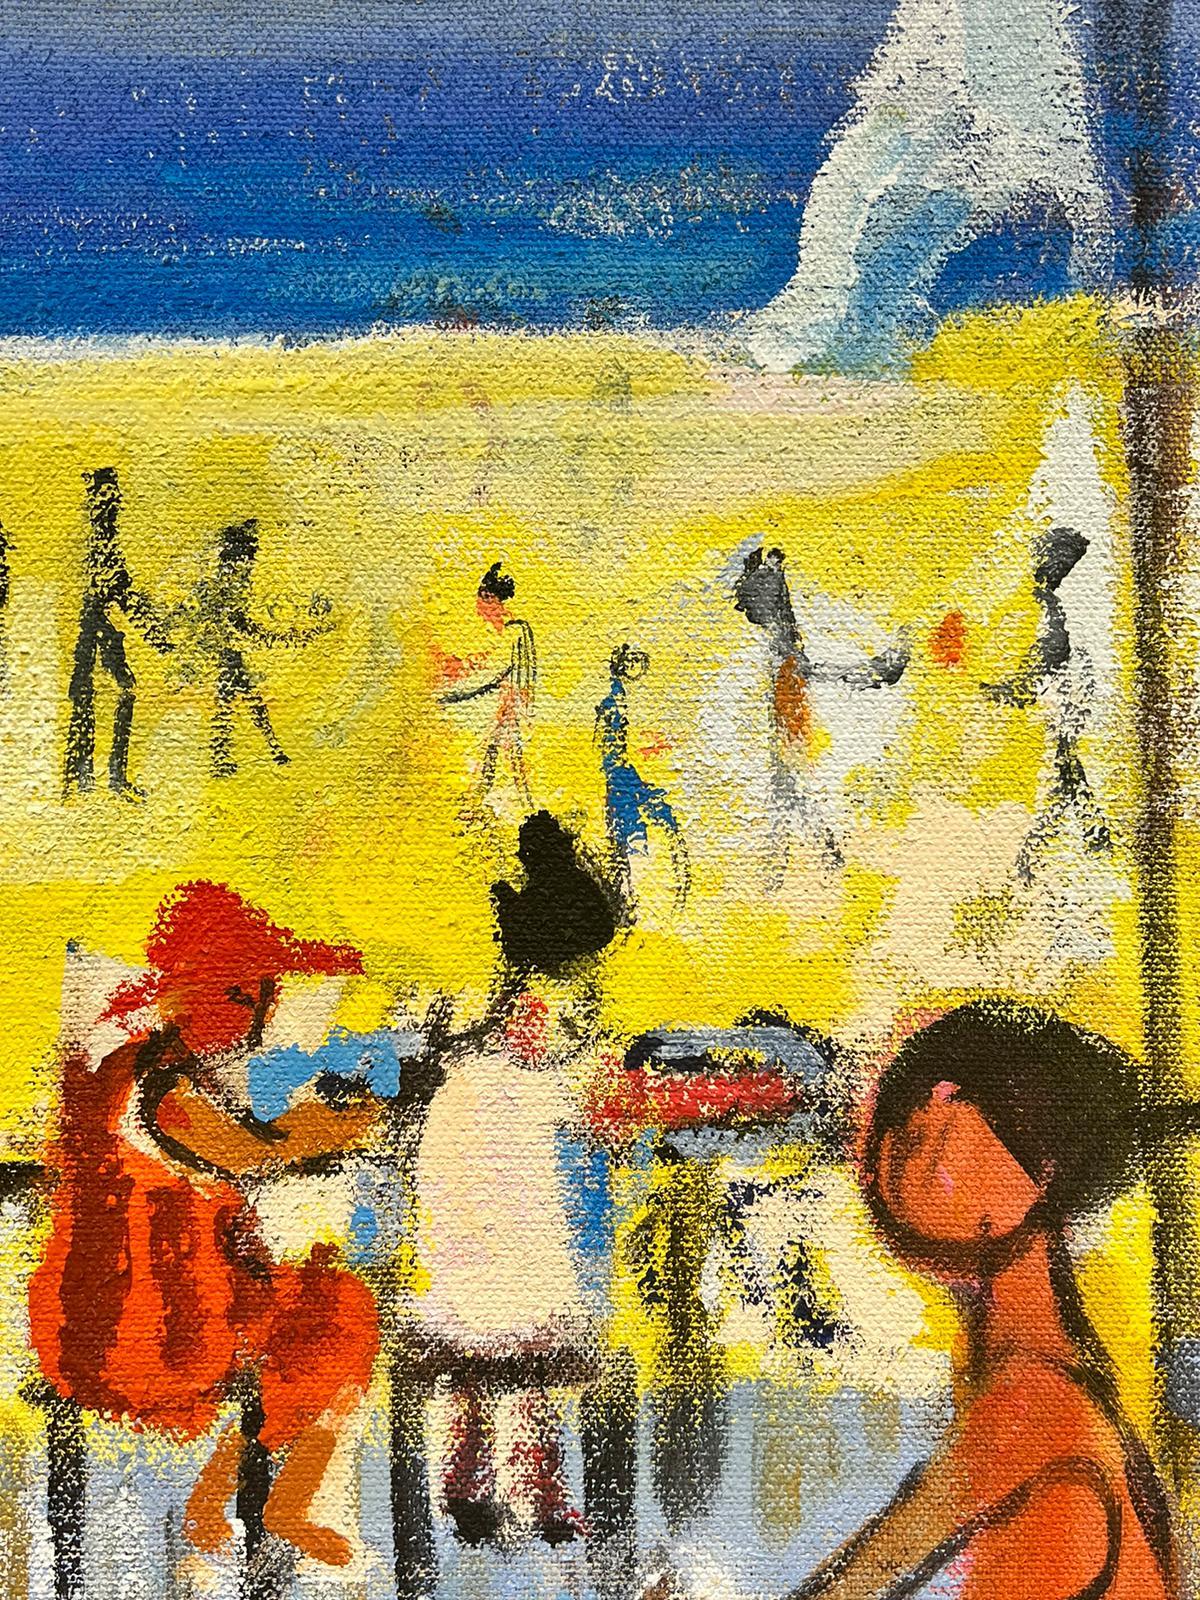 Large French Contemporary Modernist Oil Painting Figures Playing on Sunny Beach For Sale 1